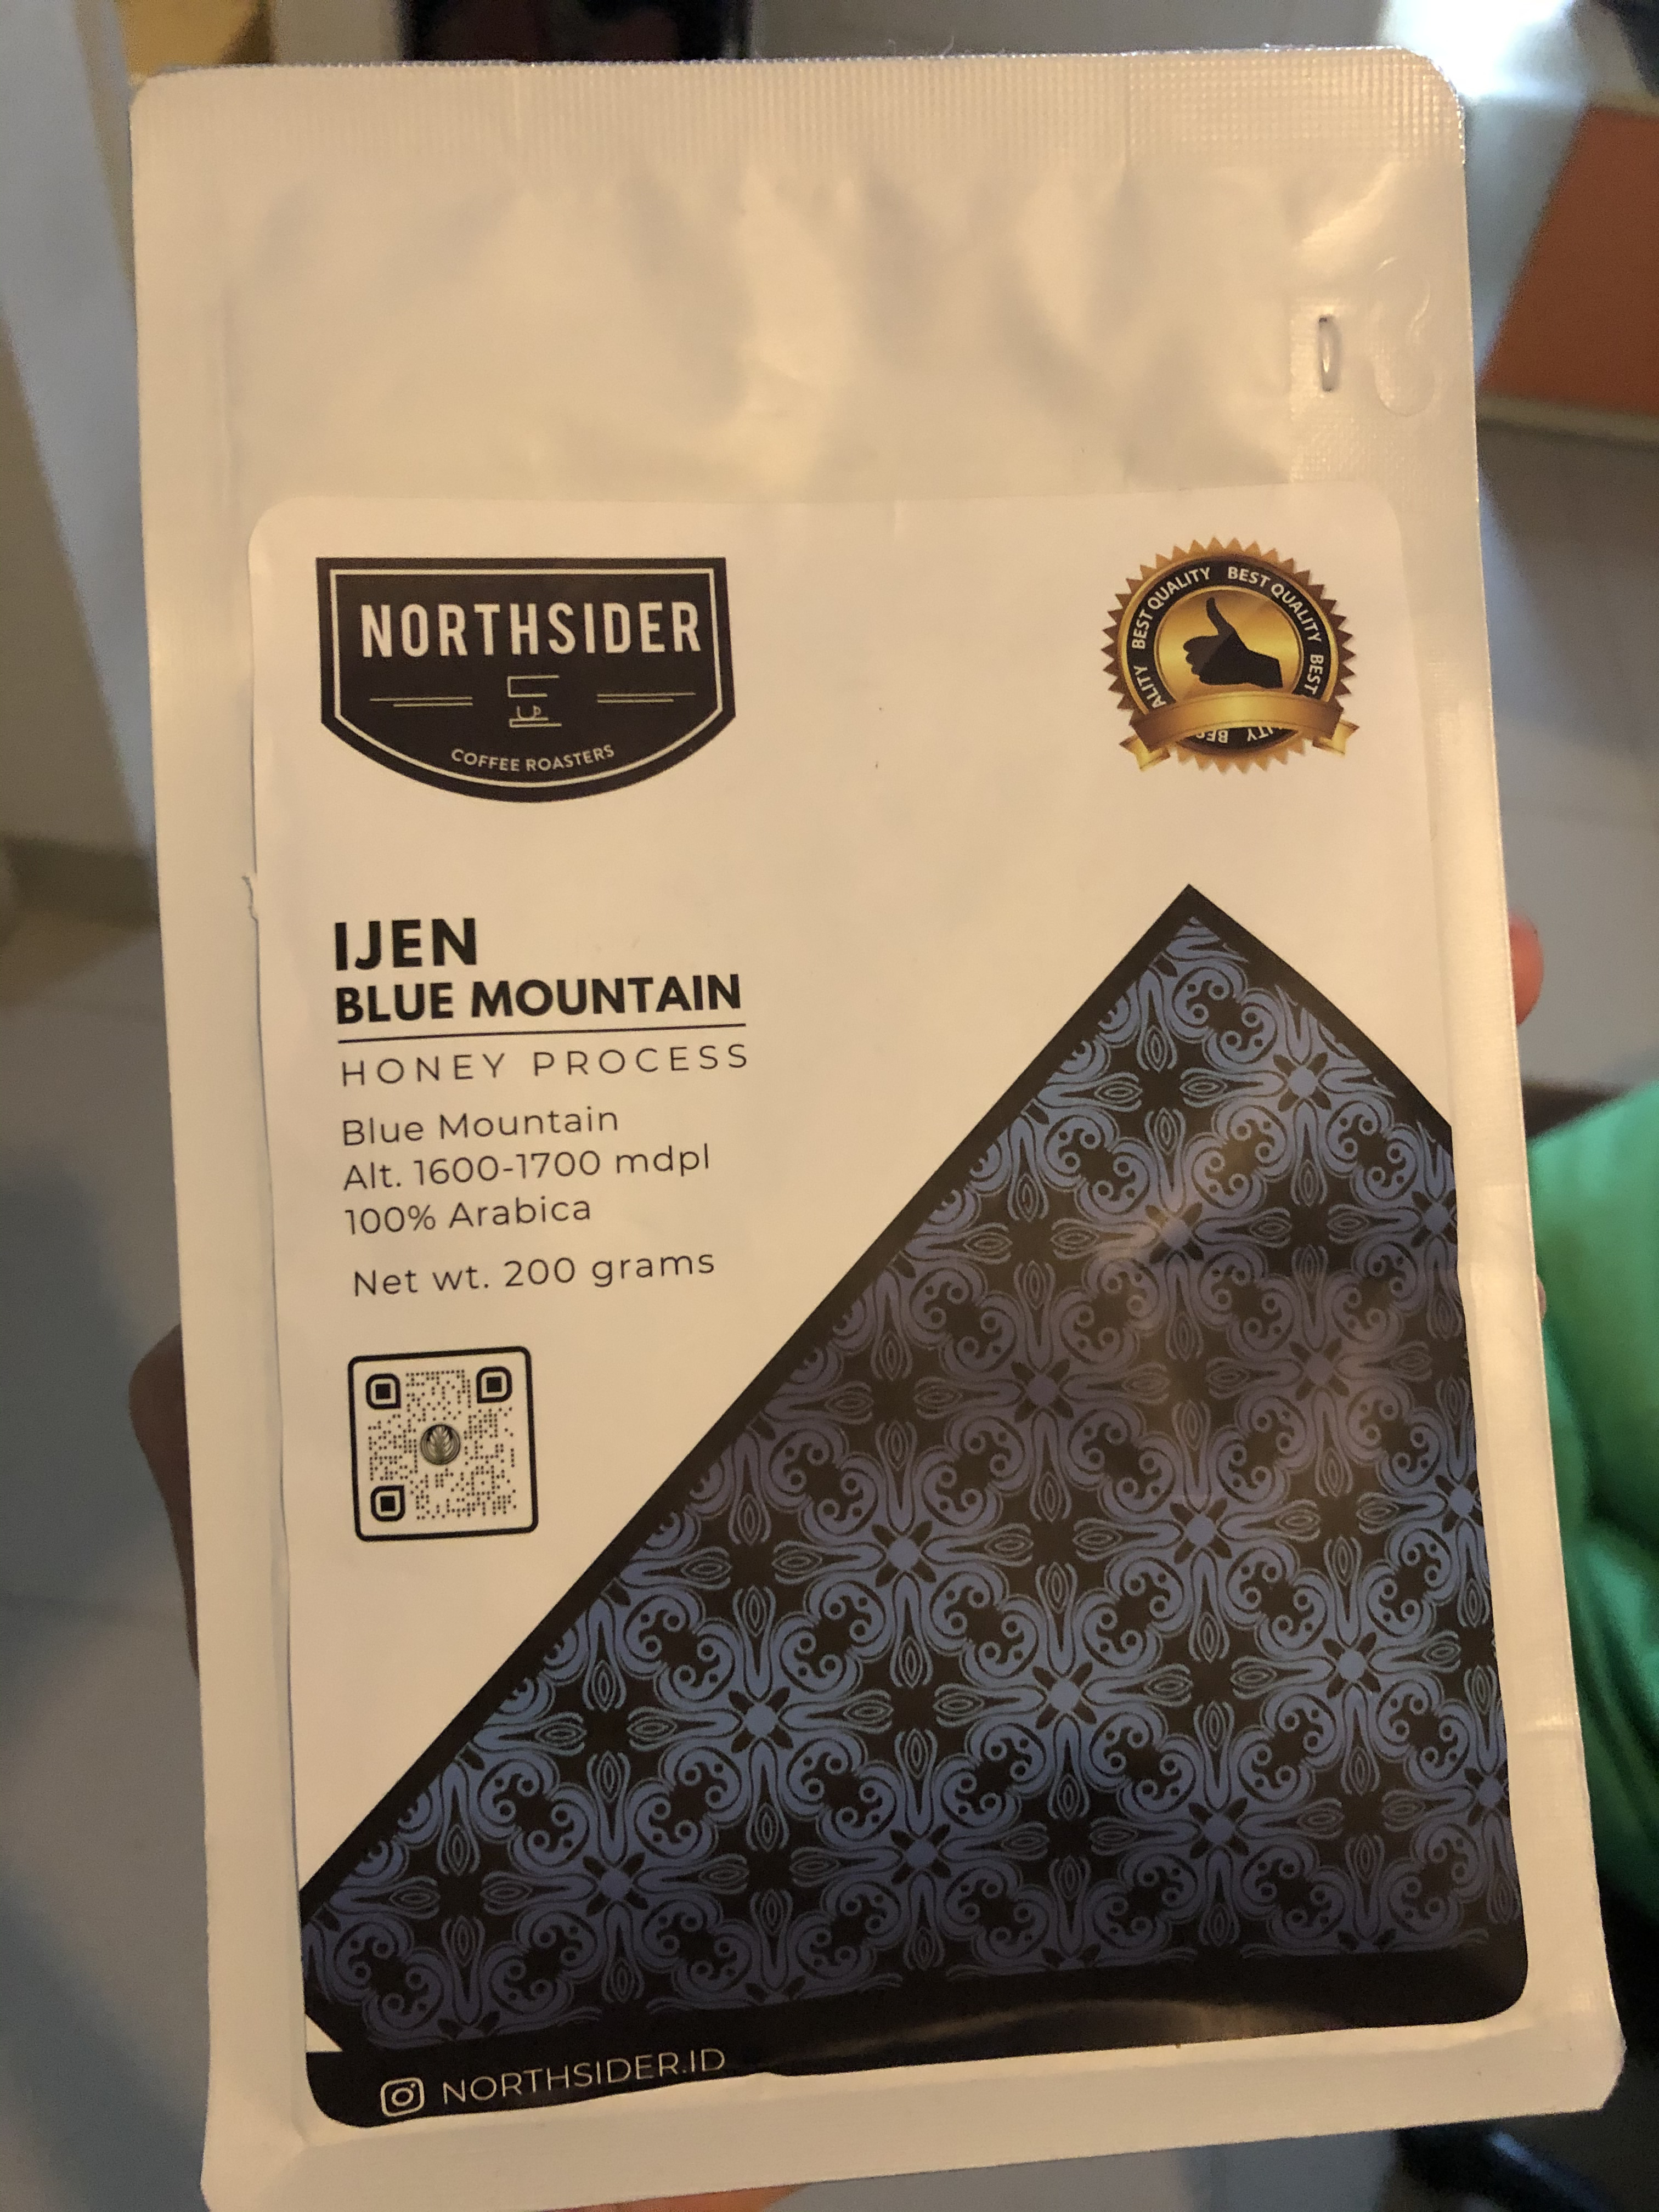 Northsider&rsquo;s Ijen Blue Mountain packaging, taken at 2020-07-14.